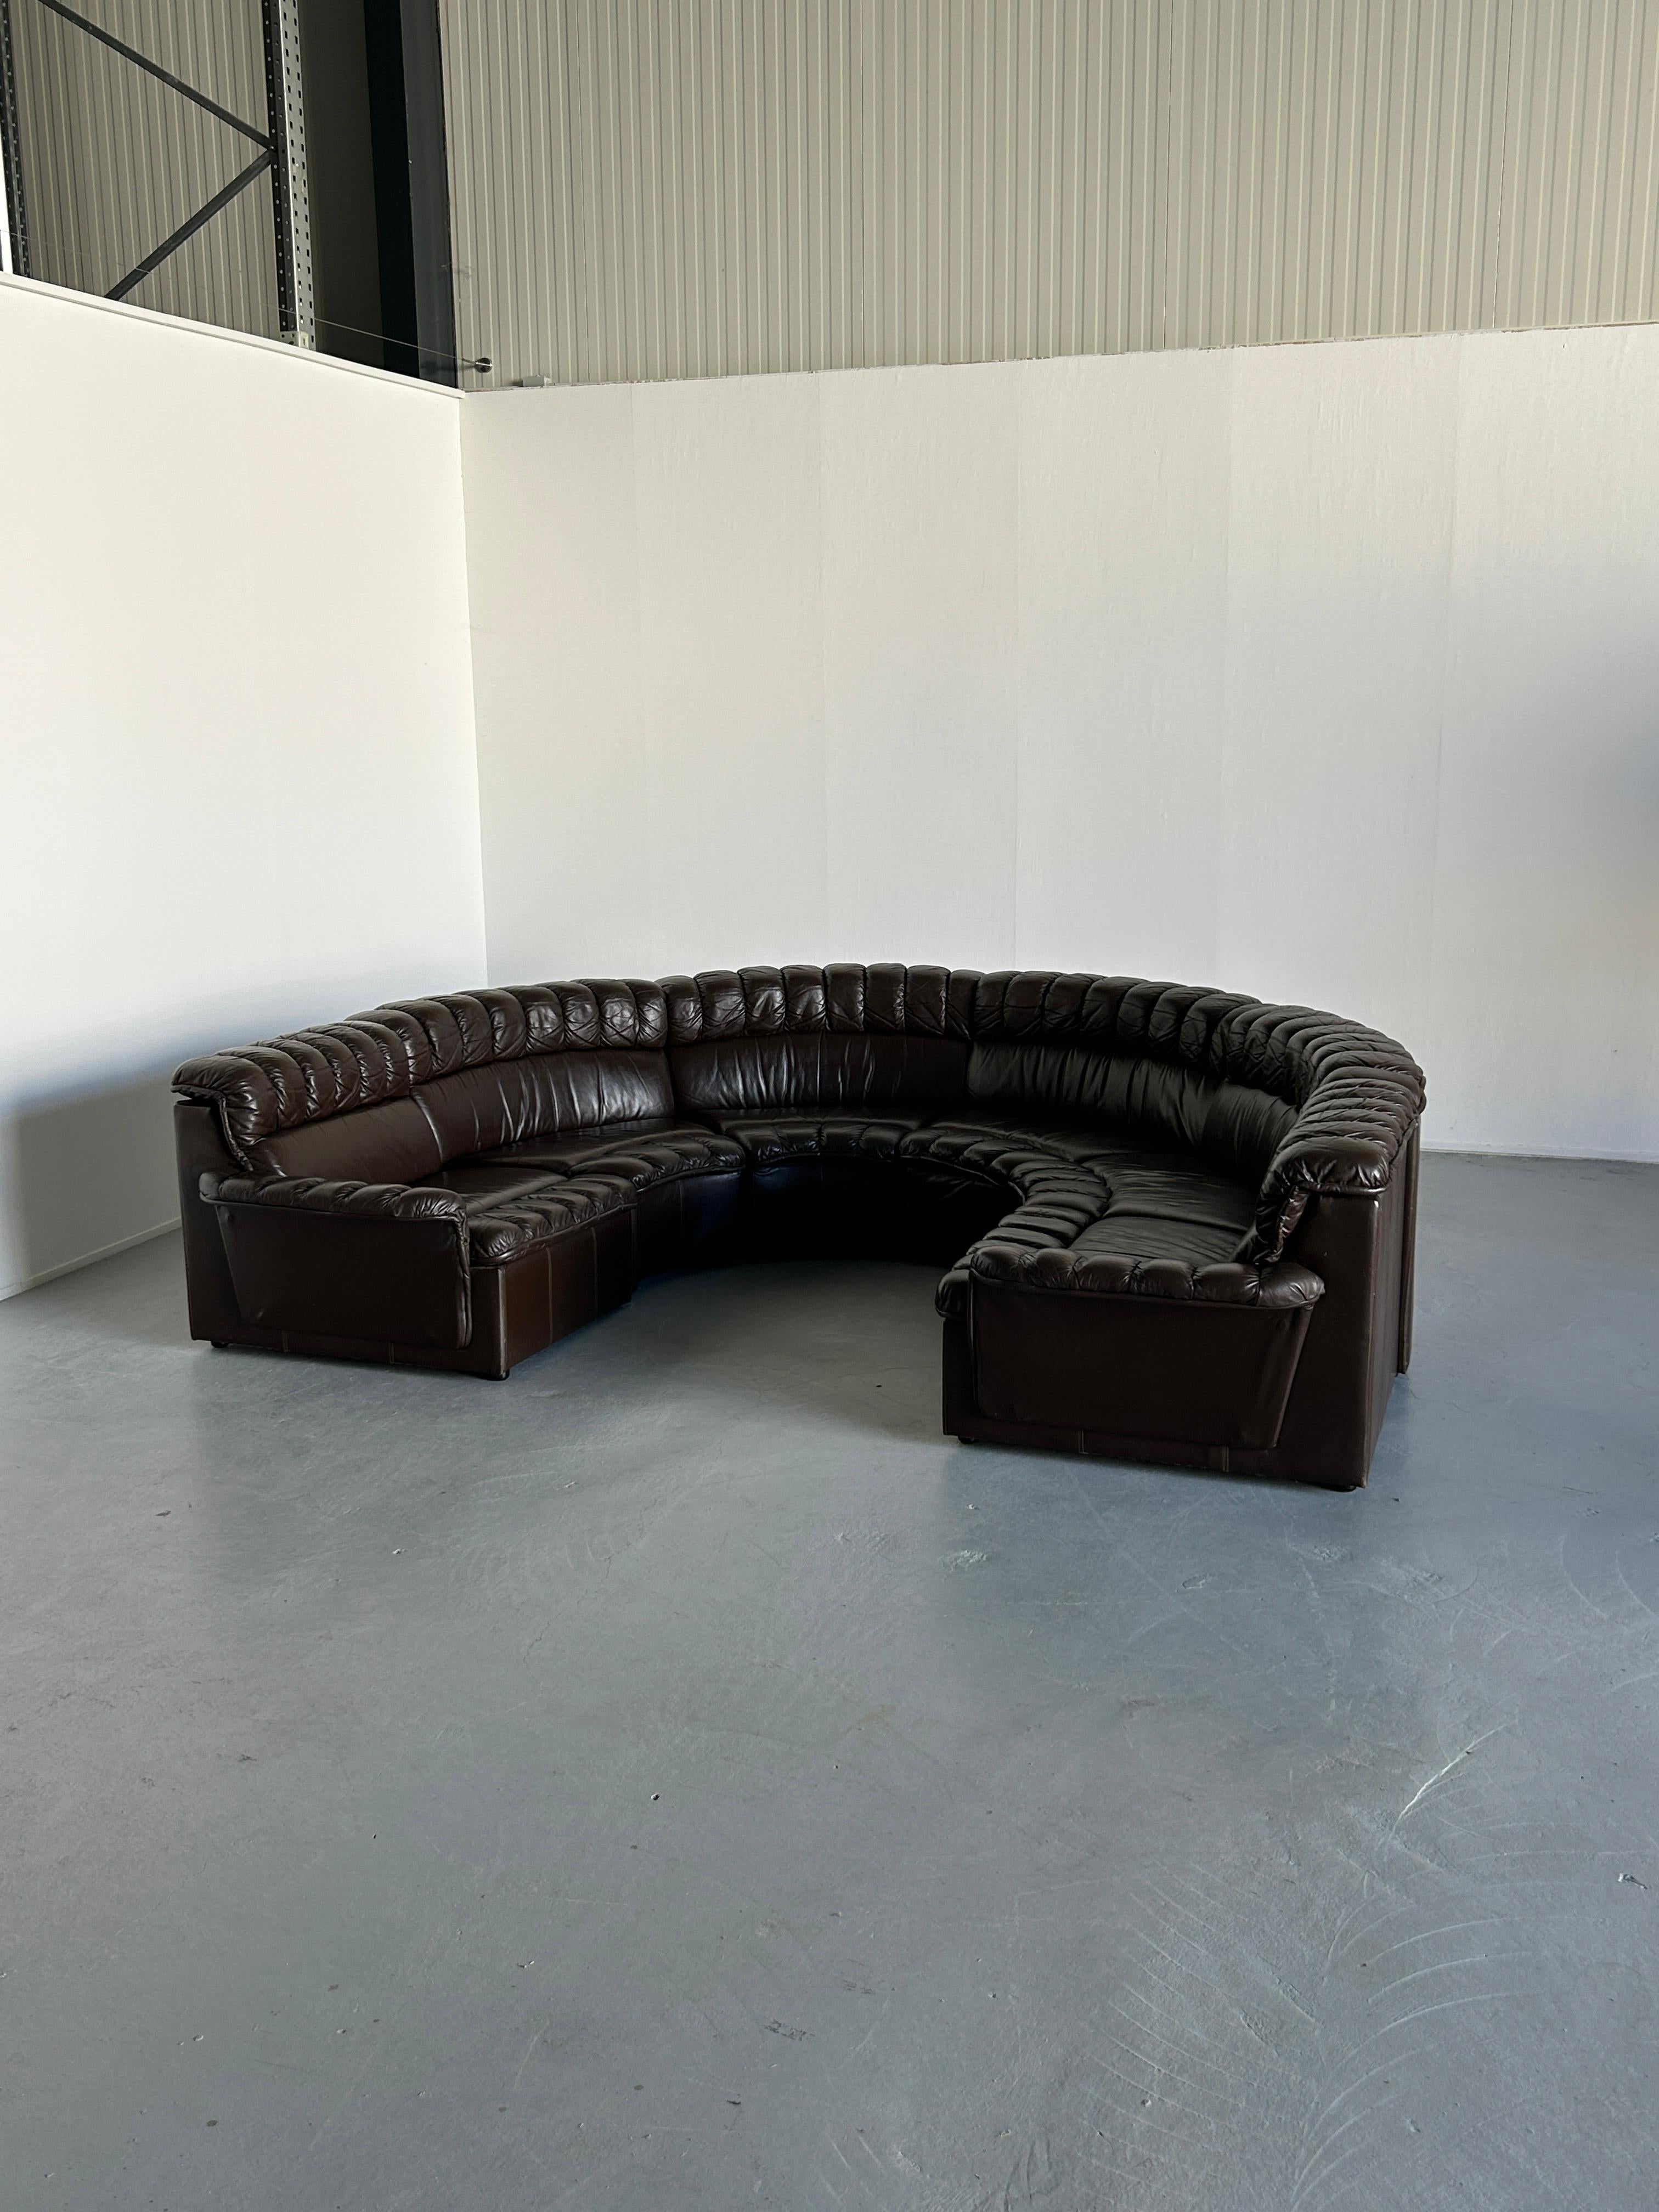 A stunning seven-part Mid-Century Modern leather U-shape sectional sofa, produced in the late 1970s in West Germany, and following the style of the De Sede DS-600 Non Stop stofa, designed by Ueli Berger, Eleanora Peduzzi-Riva, and Hans Ulrich.

A